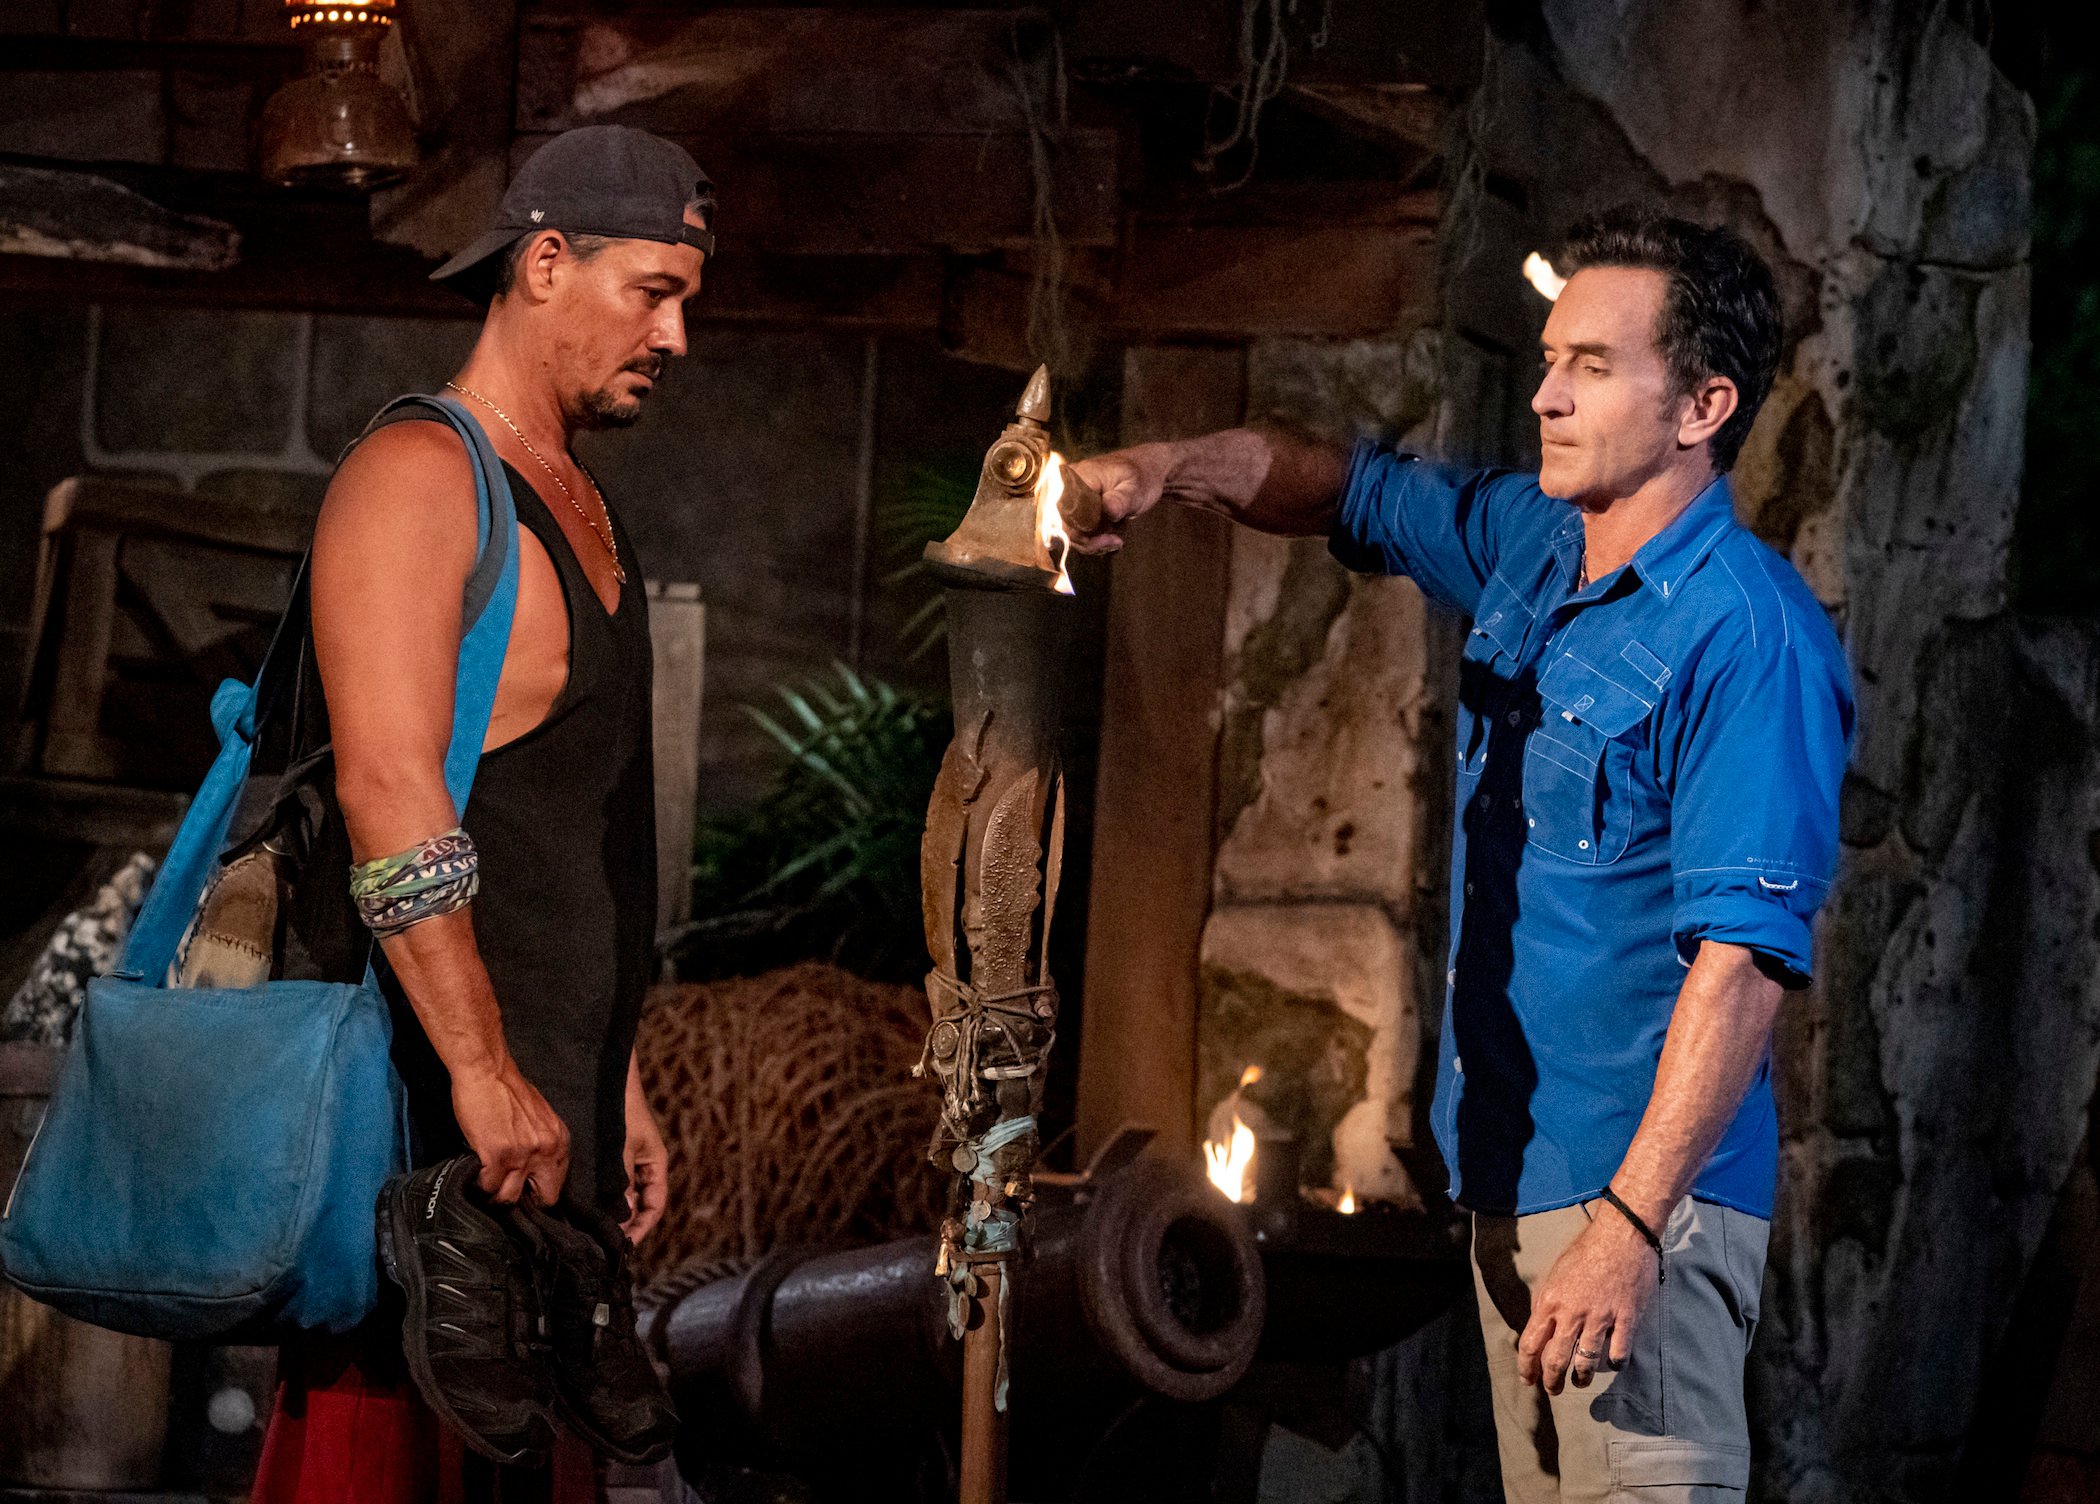 Jeff Probst, the host of 'Survivor Season 41,' Rob Mariano's Torch in the dark at Tribal Council on 'Survivor'